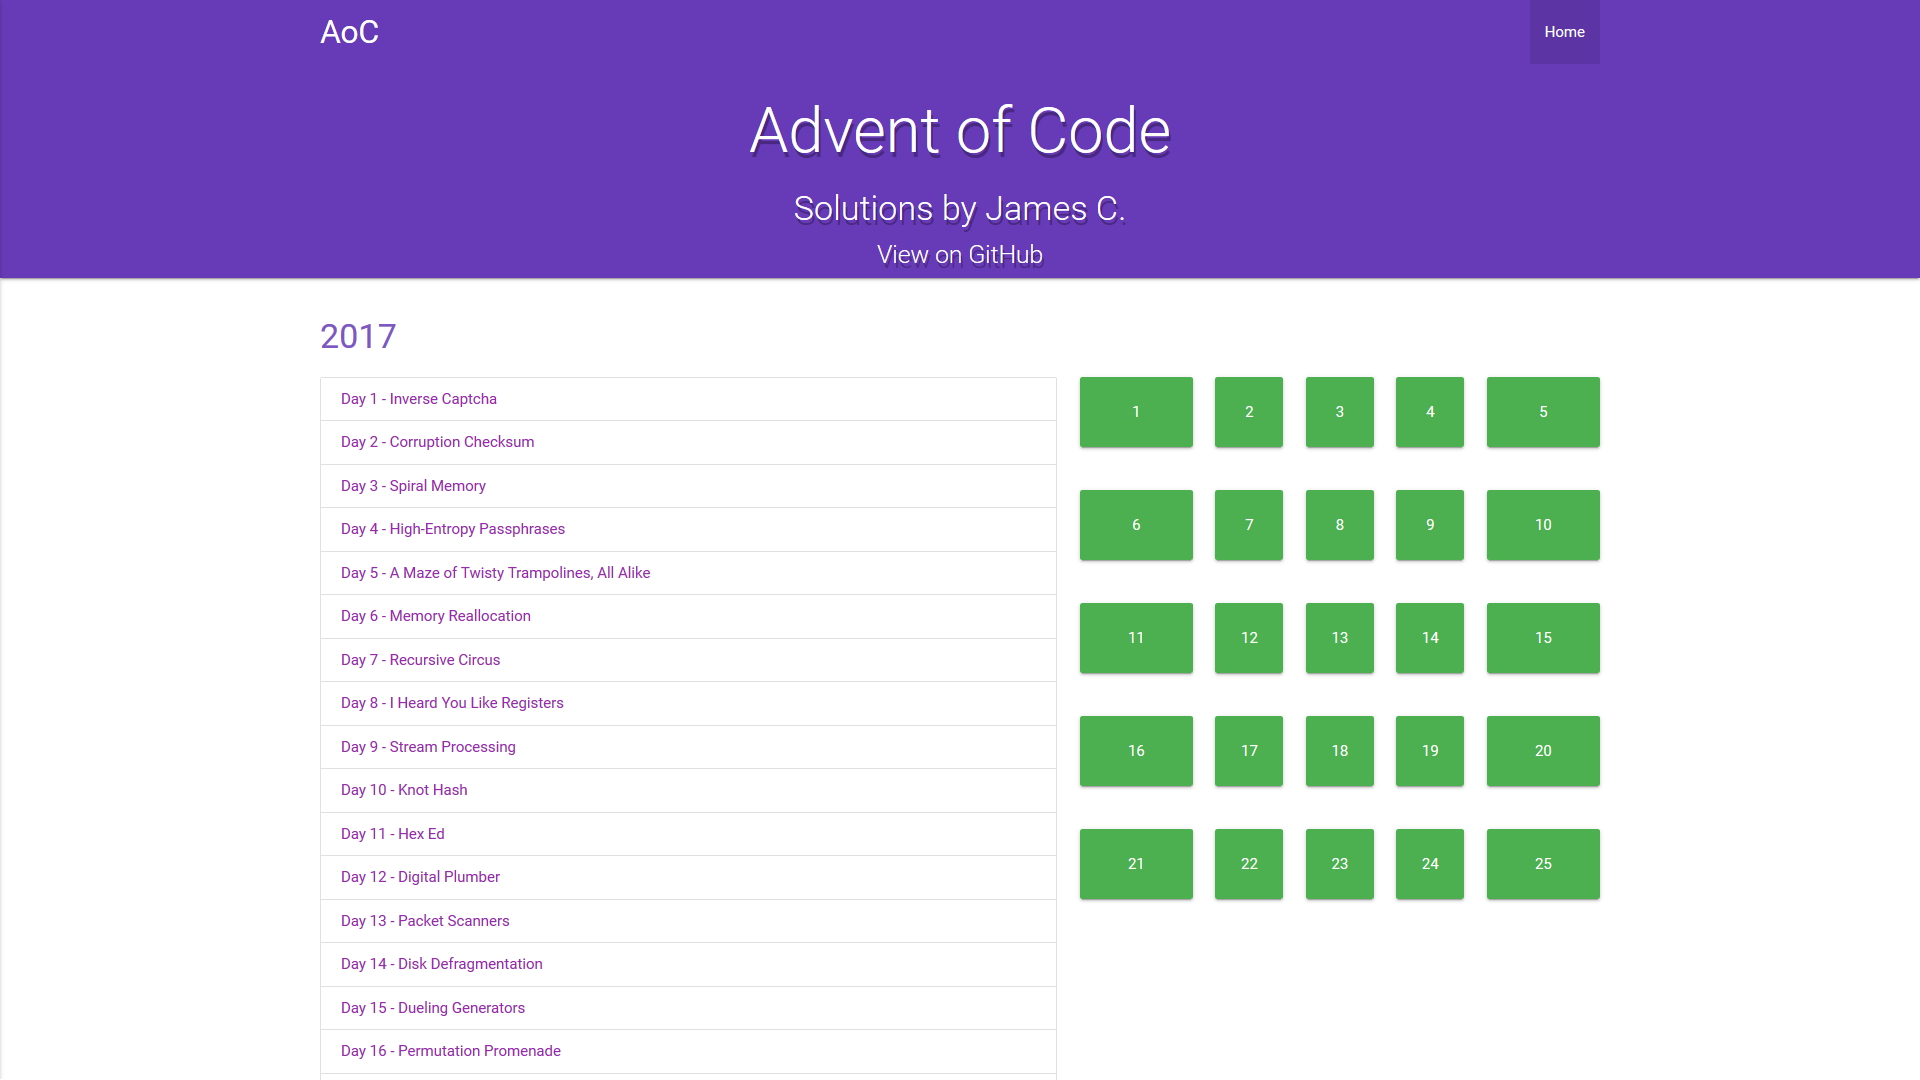 A screenshot of James' solutions website for Advent of Code. The list of puzzles for 2017 is visible, and all 25 days are shown as being completed.